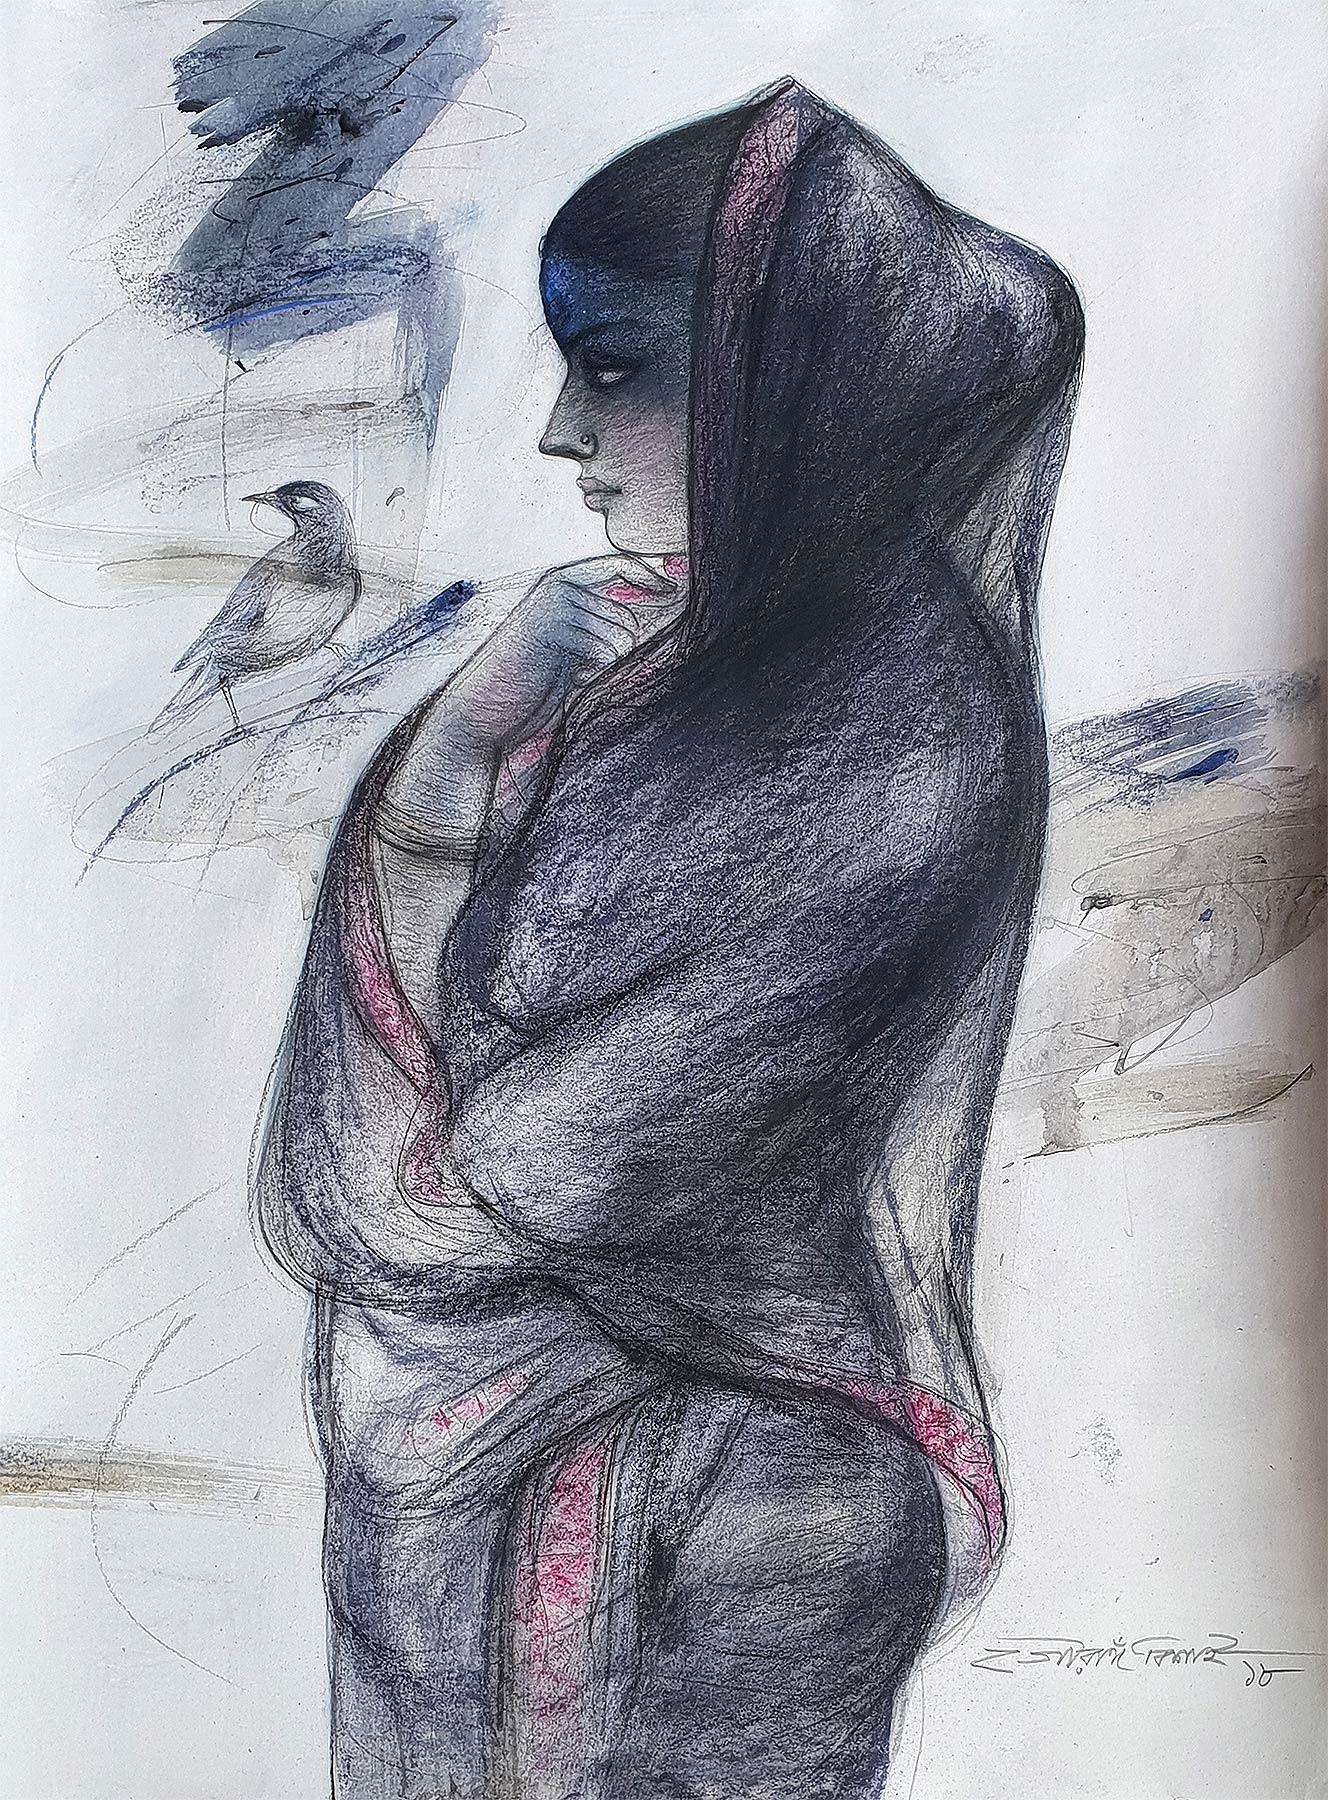 Indian Bengali Women , Charcoal, Pastel on Paper, Blue, Black, Red "In Stock" - Mixed Media Art by Gaurango Beshai 